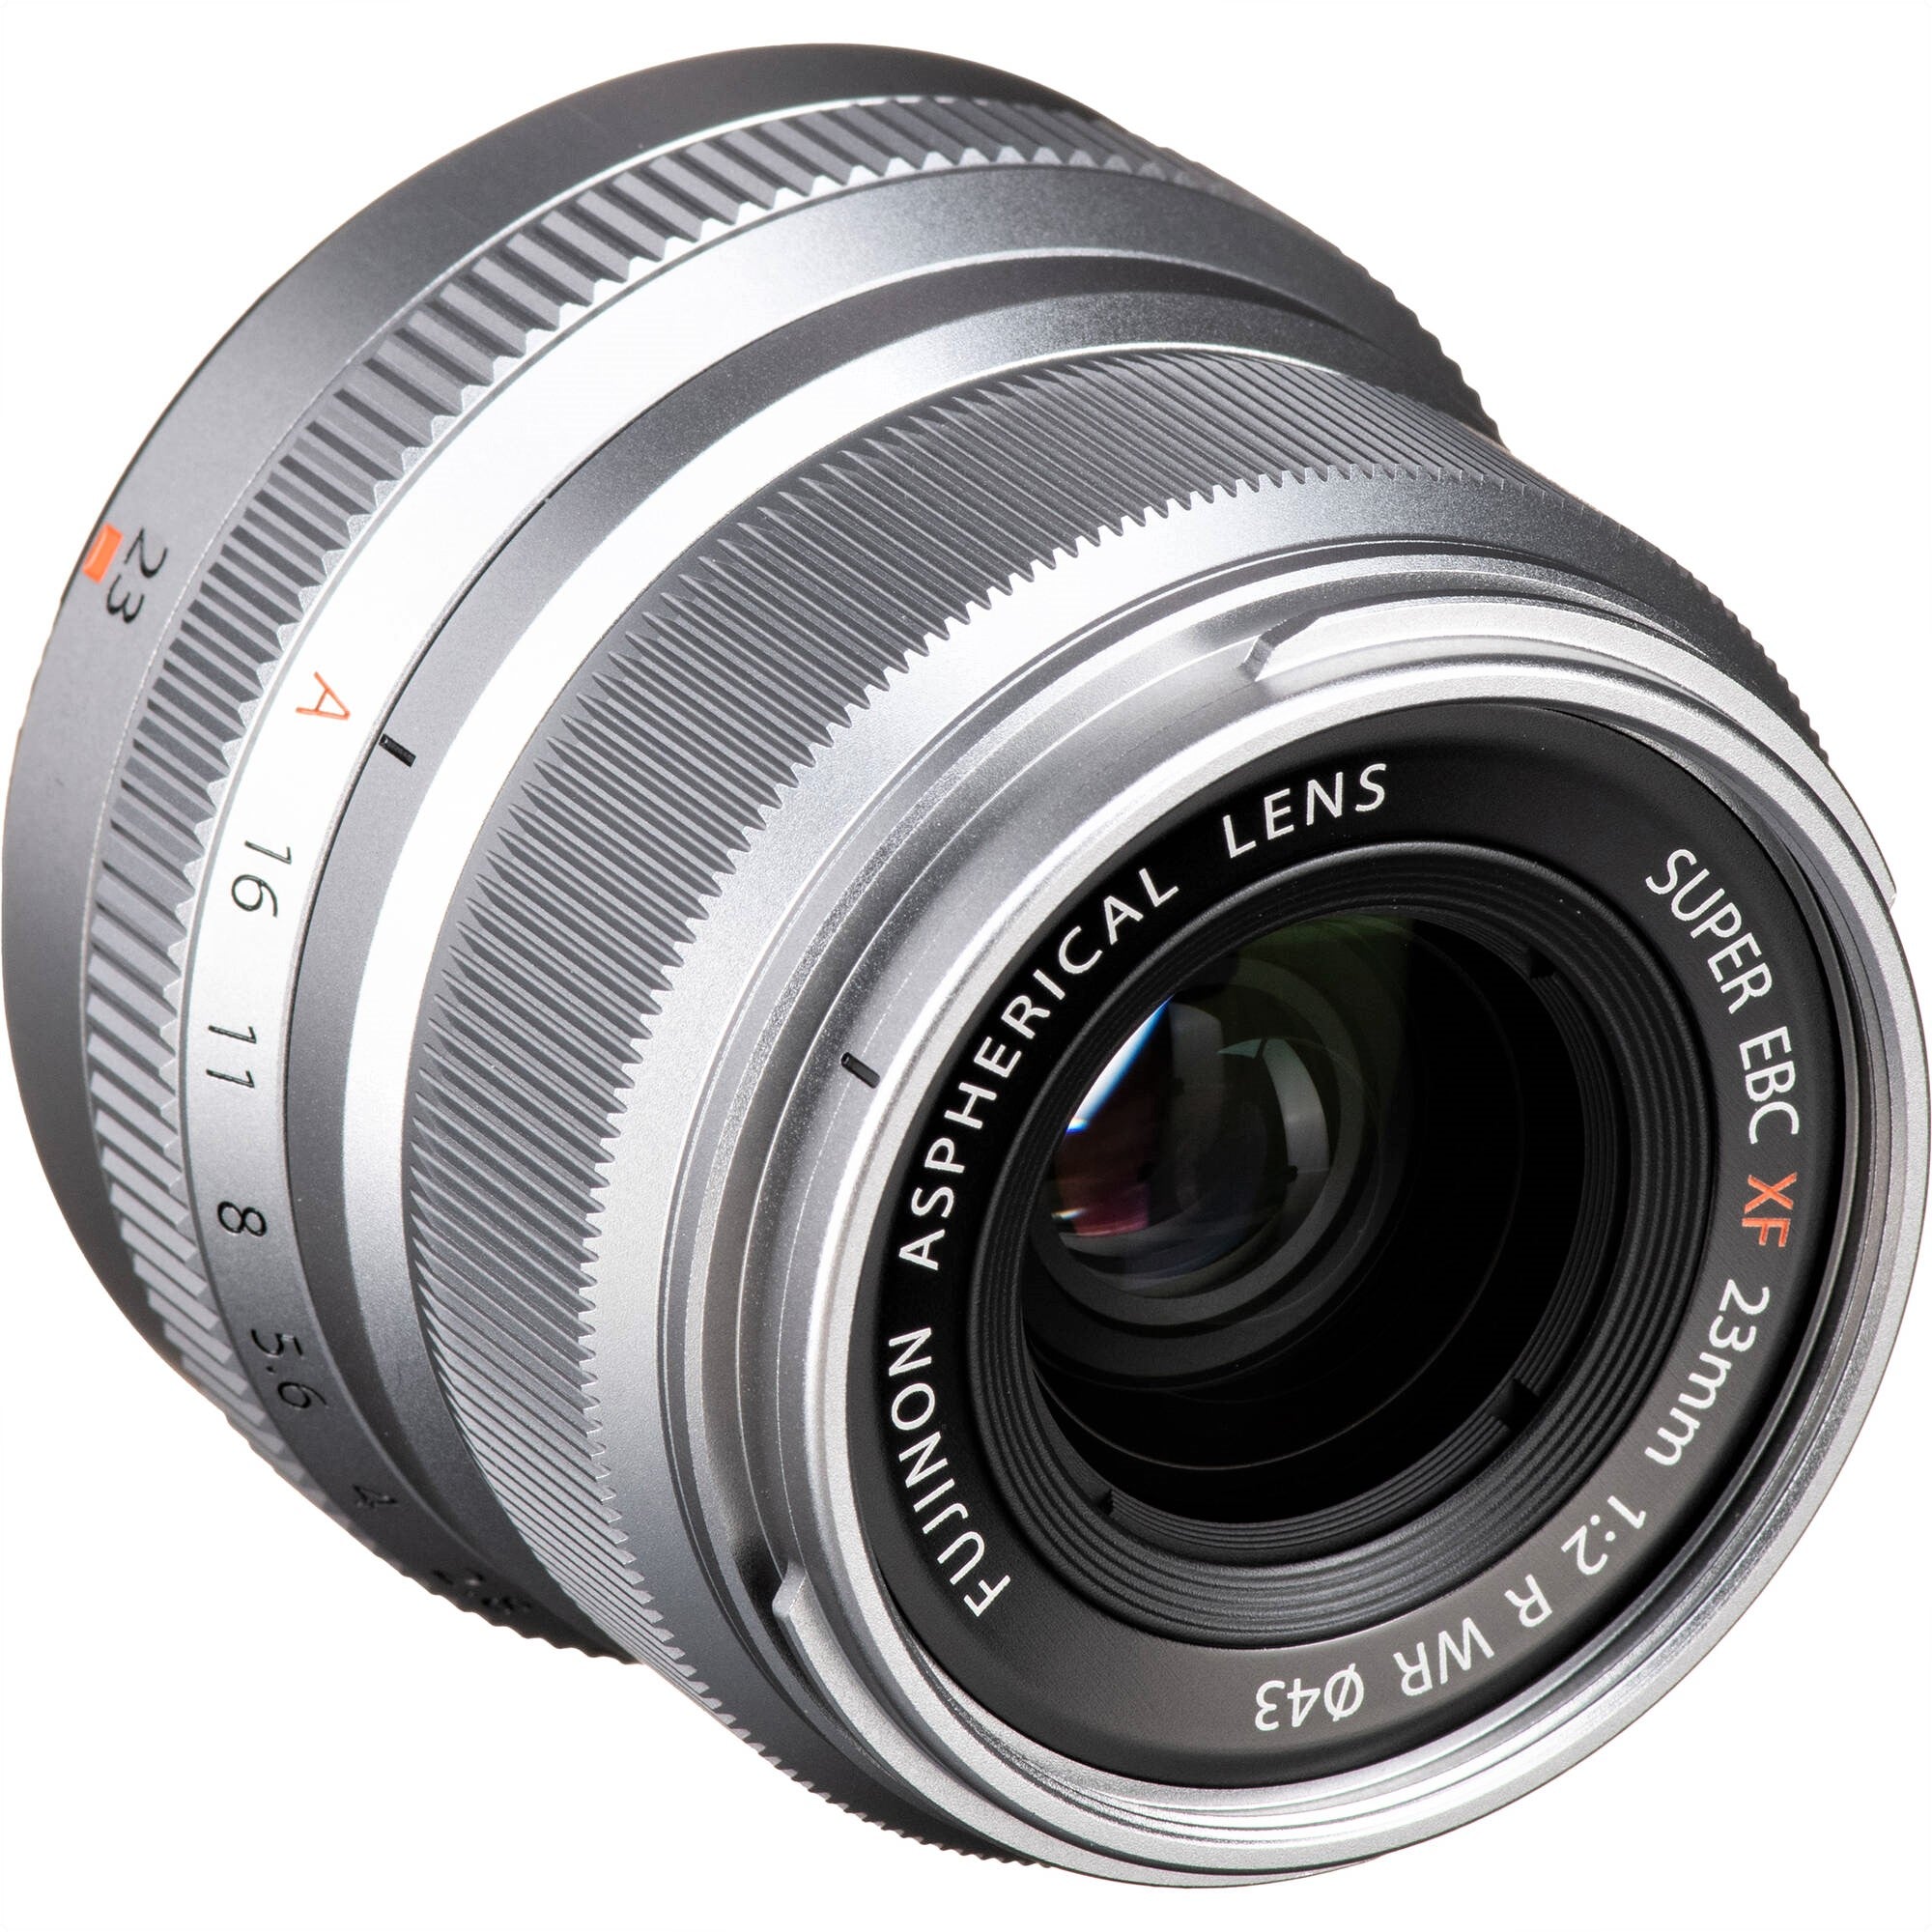 FUJIFILM XF 23mm f/2 R WR Lens (Silver) - Front Side View